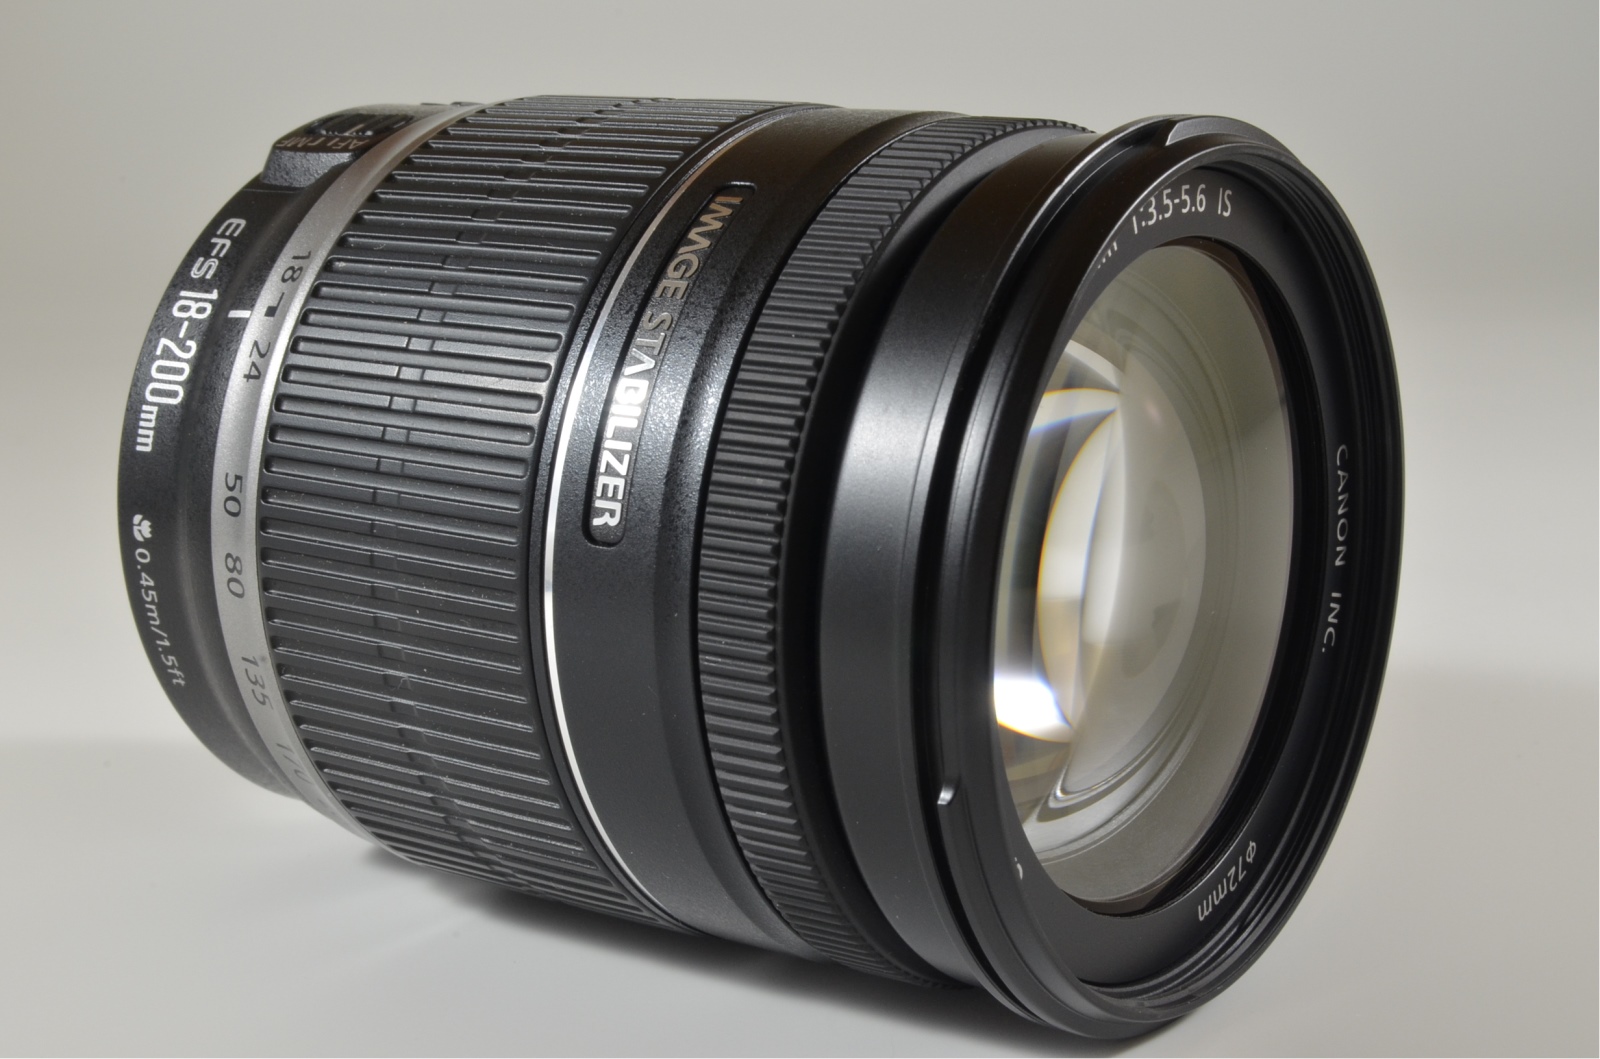 canon zoom lens ef-s 18-200 mm f/3.5-5.6 is lens